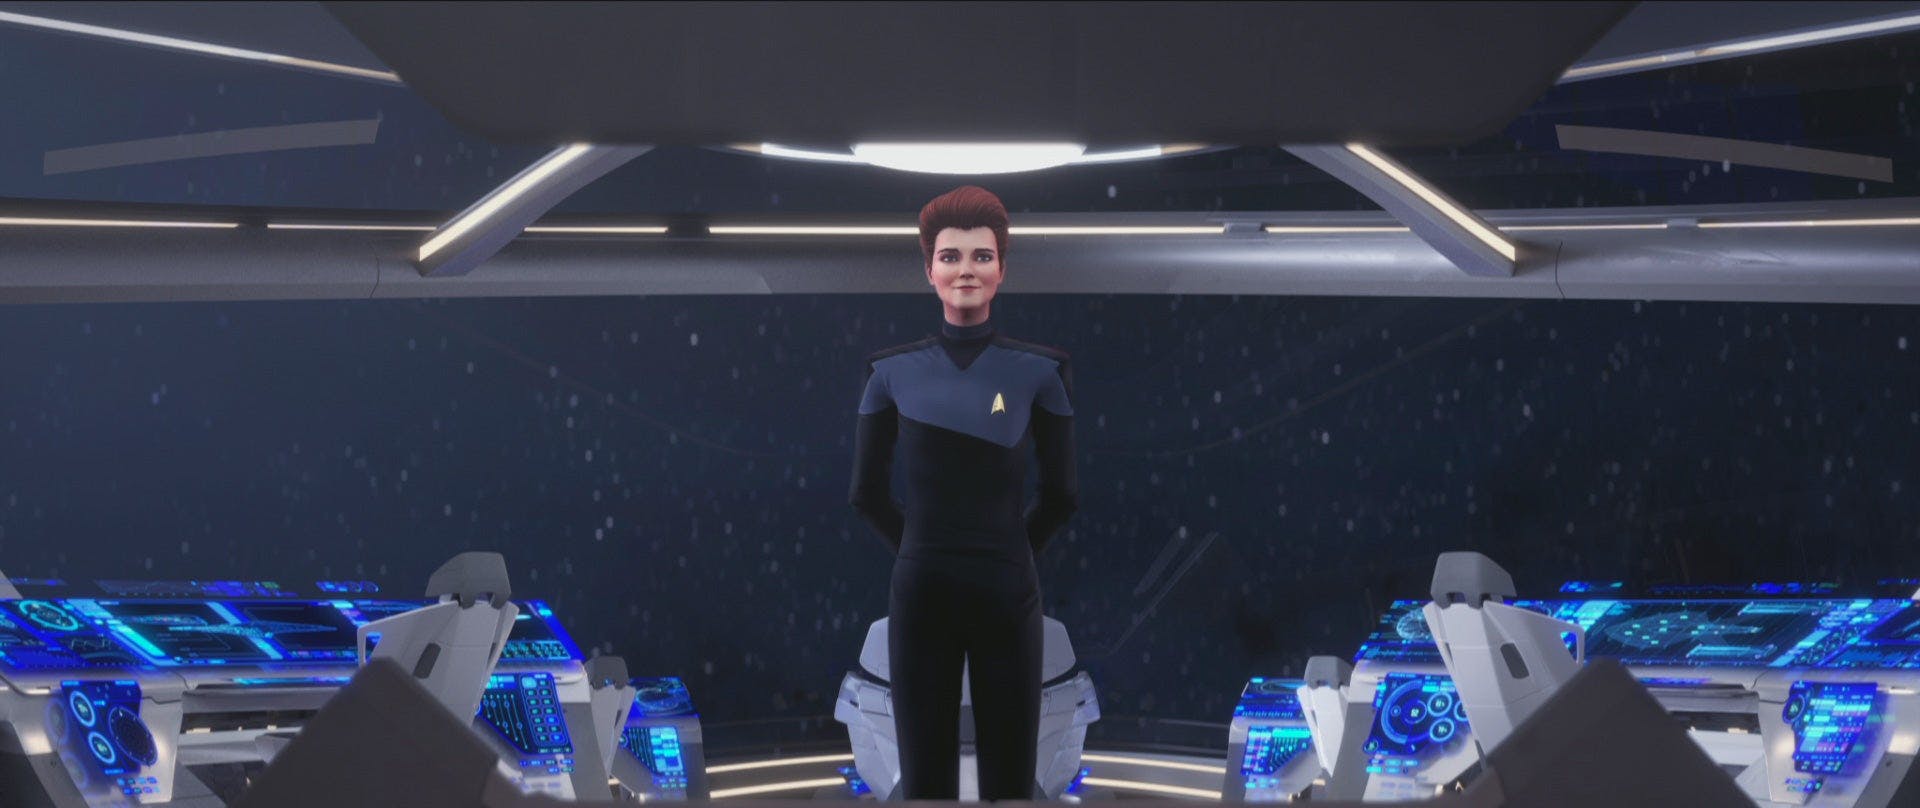 Holo-Janeway faces with her back to the viewscreen, standing proud on Star Trek: Prodigy